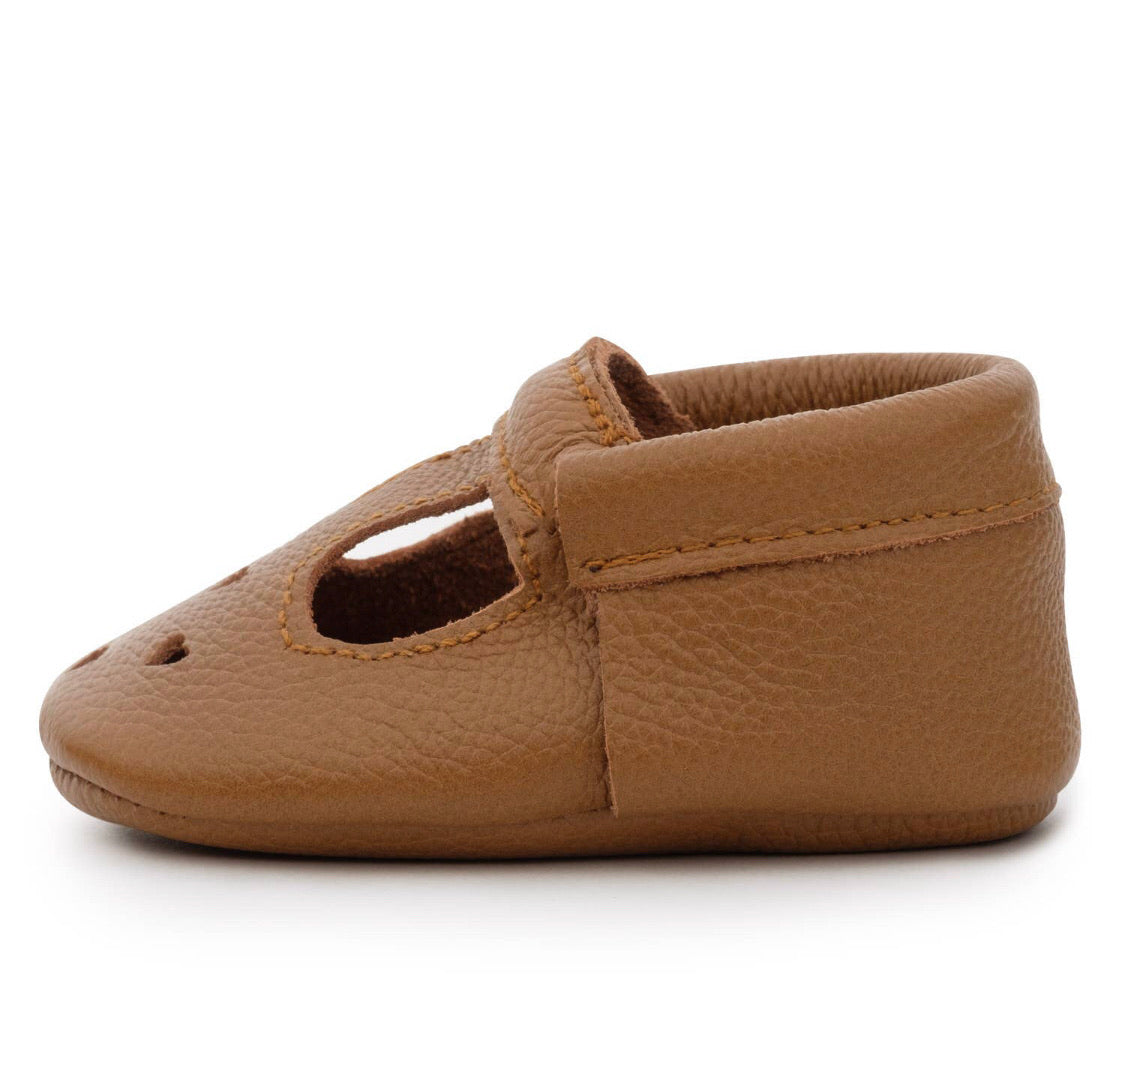 Classic Brown Mary Janes - 4